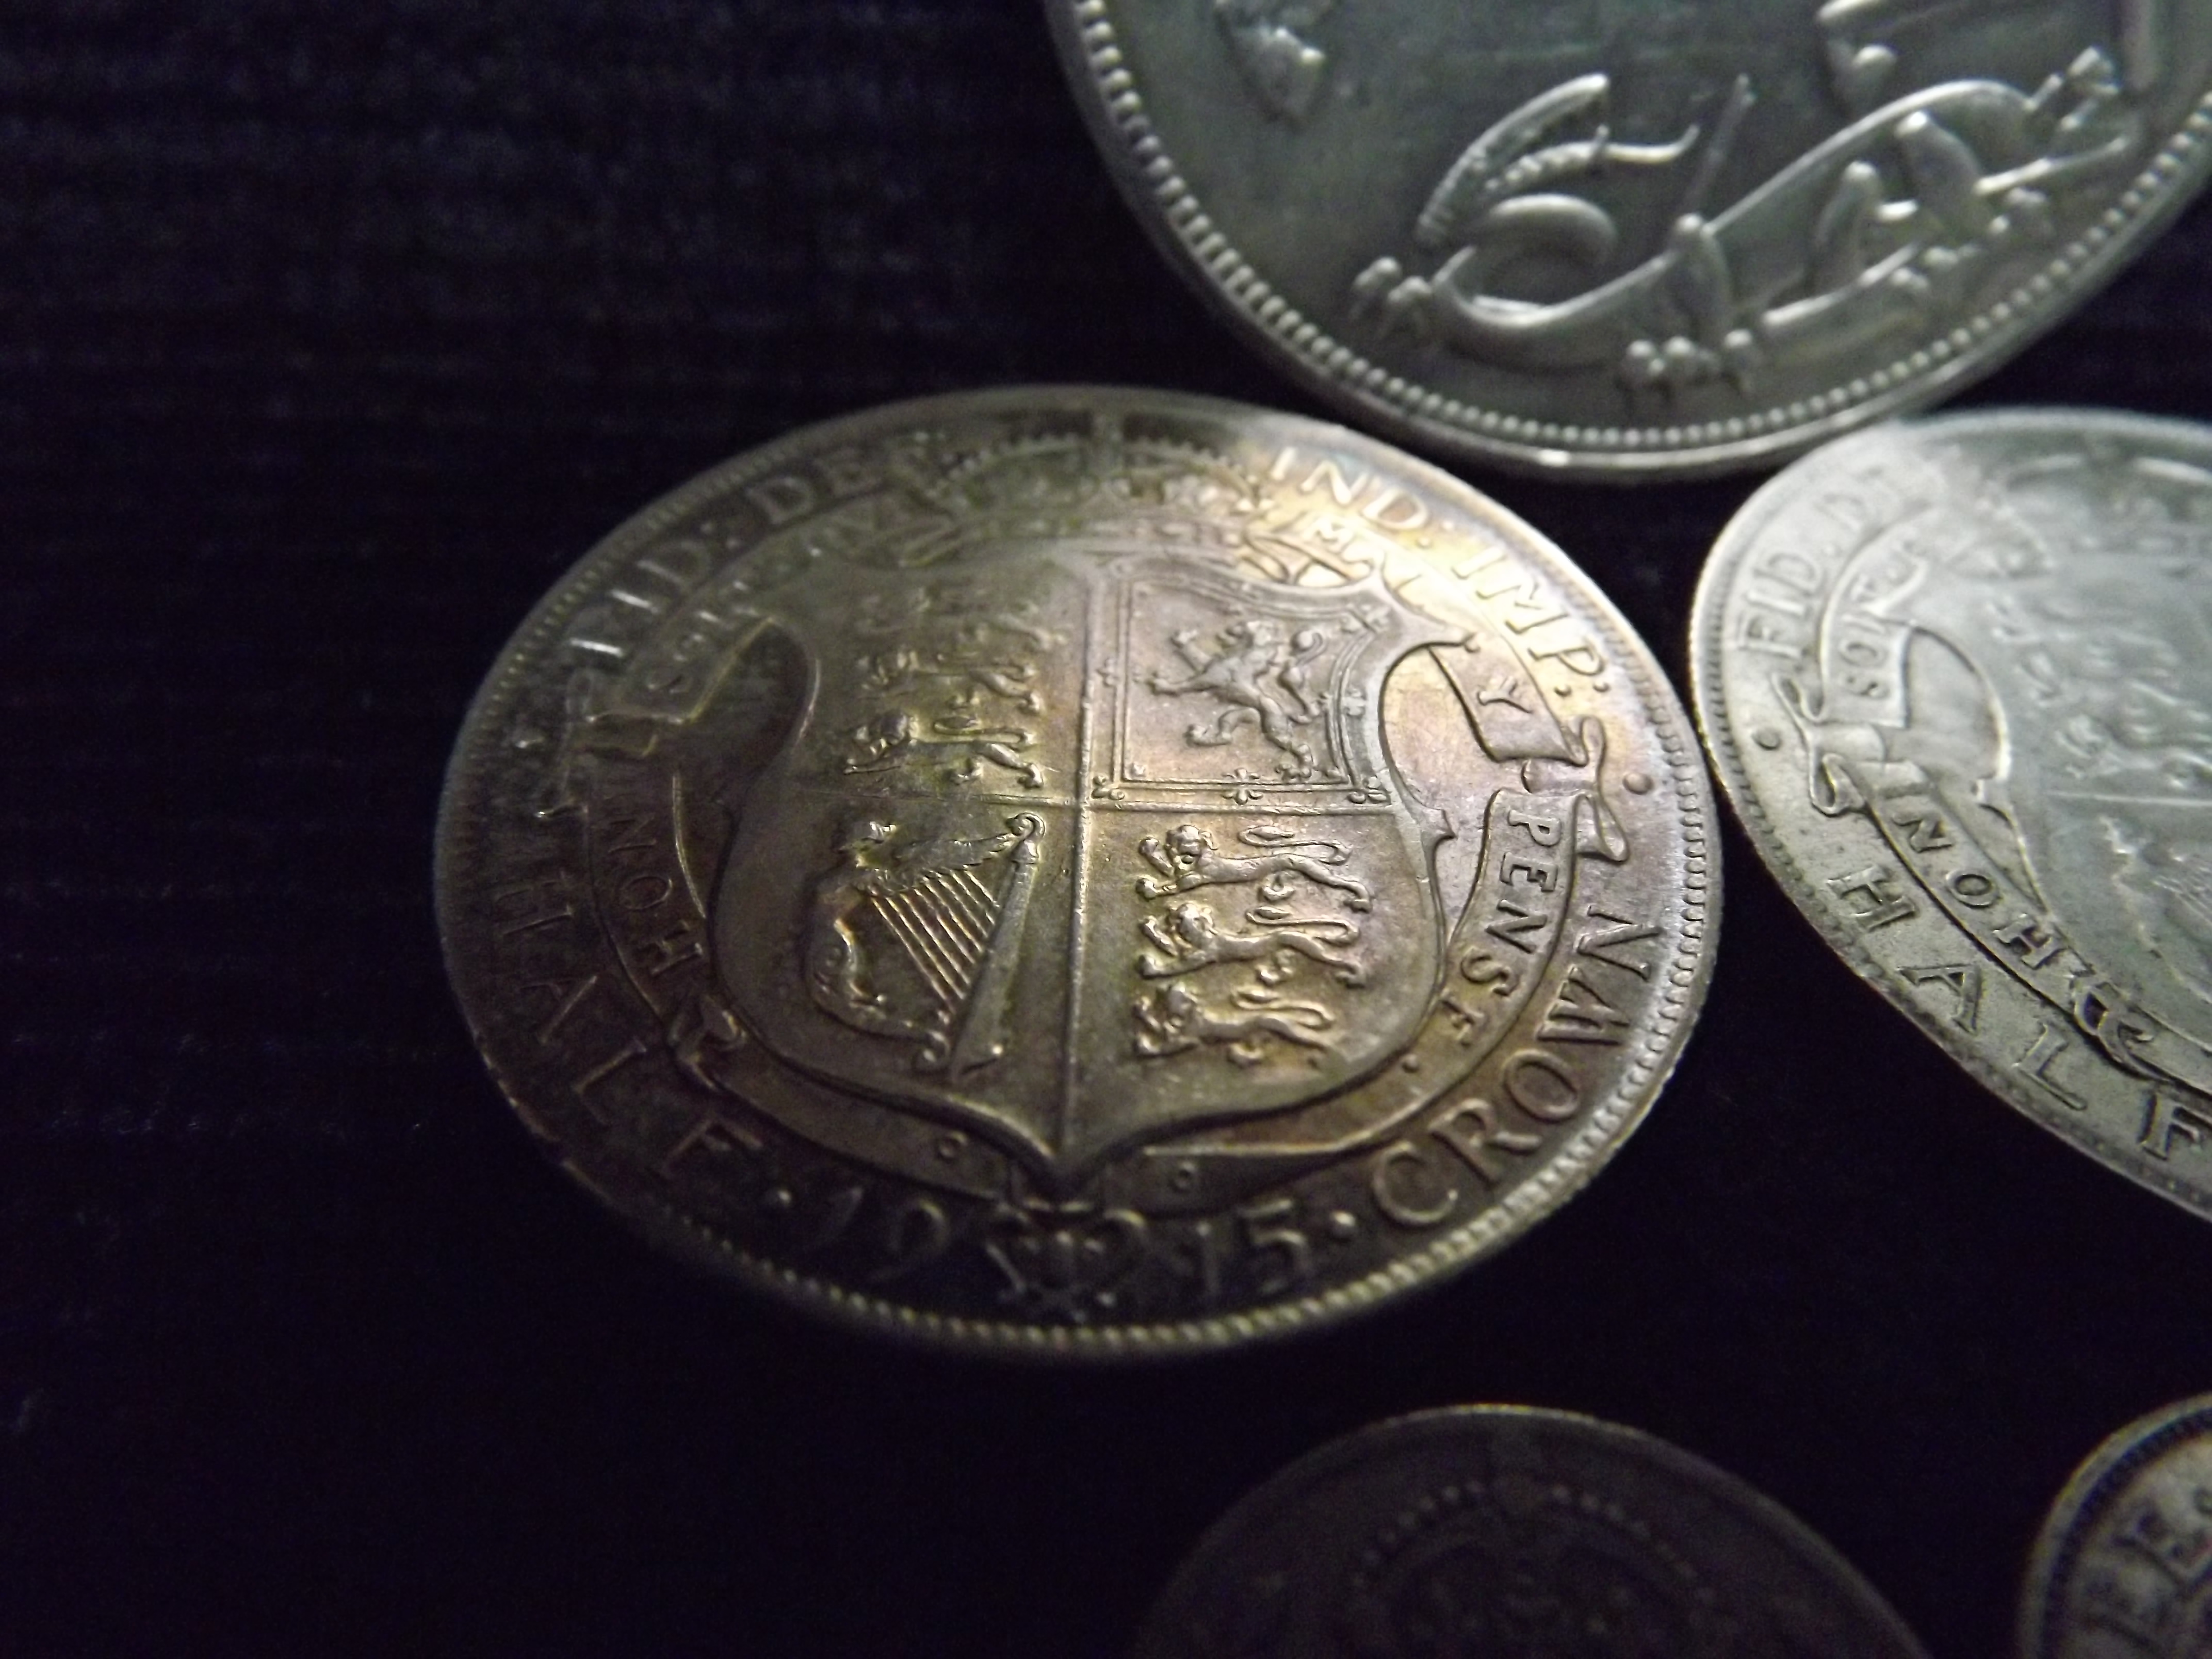 5 x George V Coins. GB Royal Mint. 1 x 1935 Crown, 2 x Half Crown 1915 & 1916 and 2 x Sixpences 1916 - Image 8 of 10